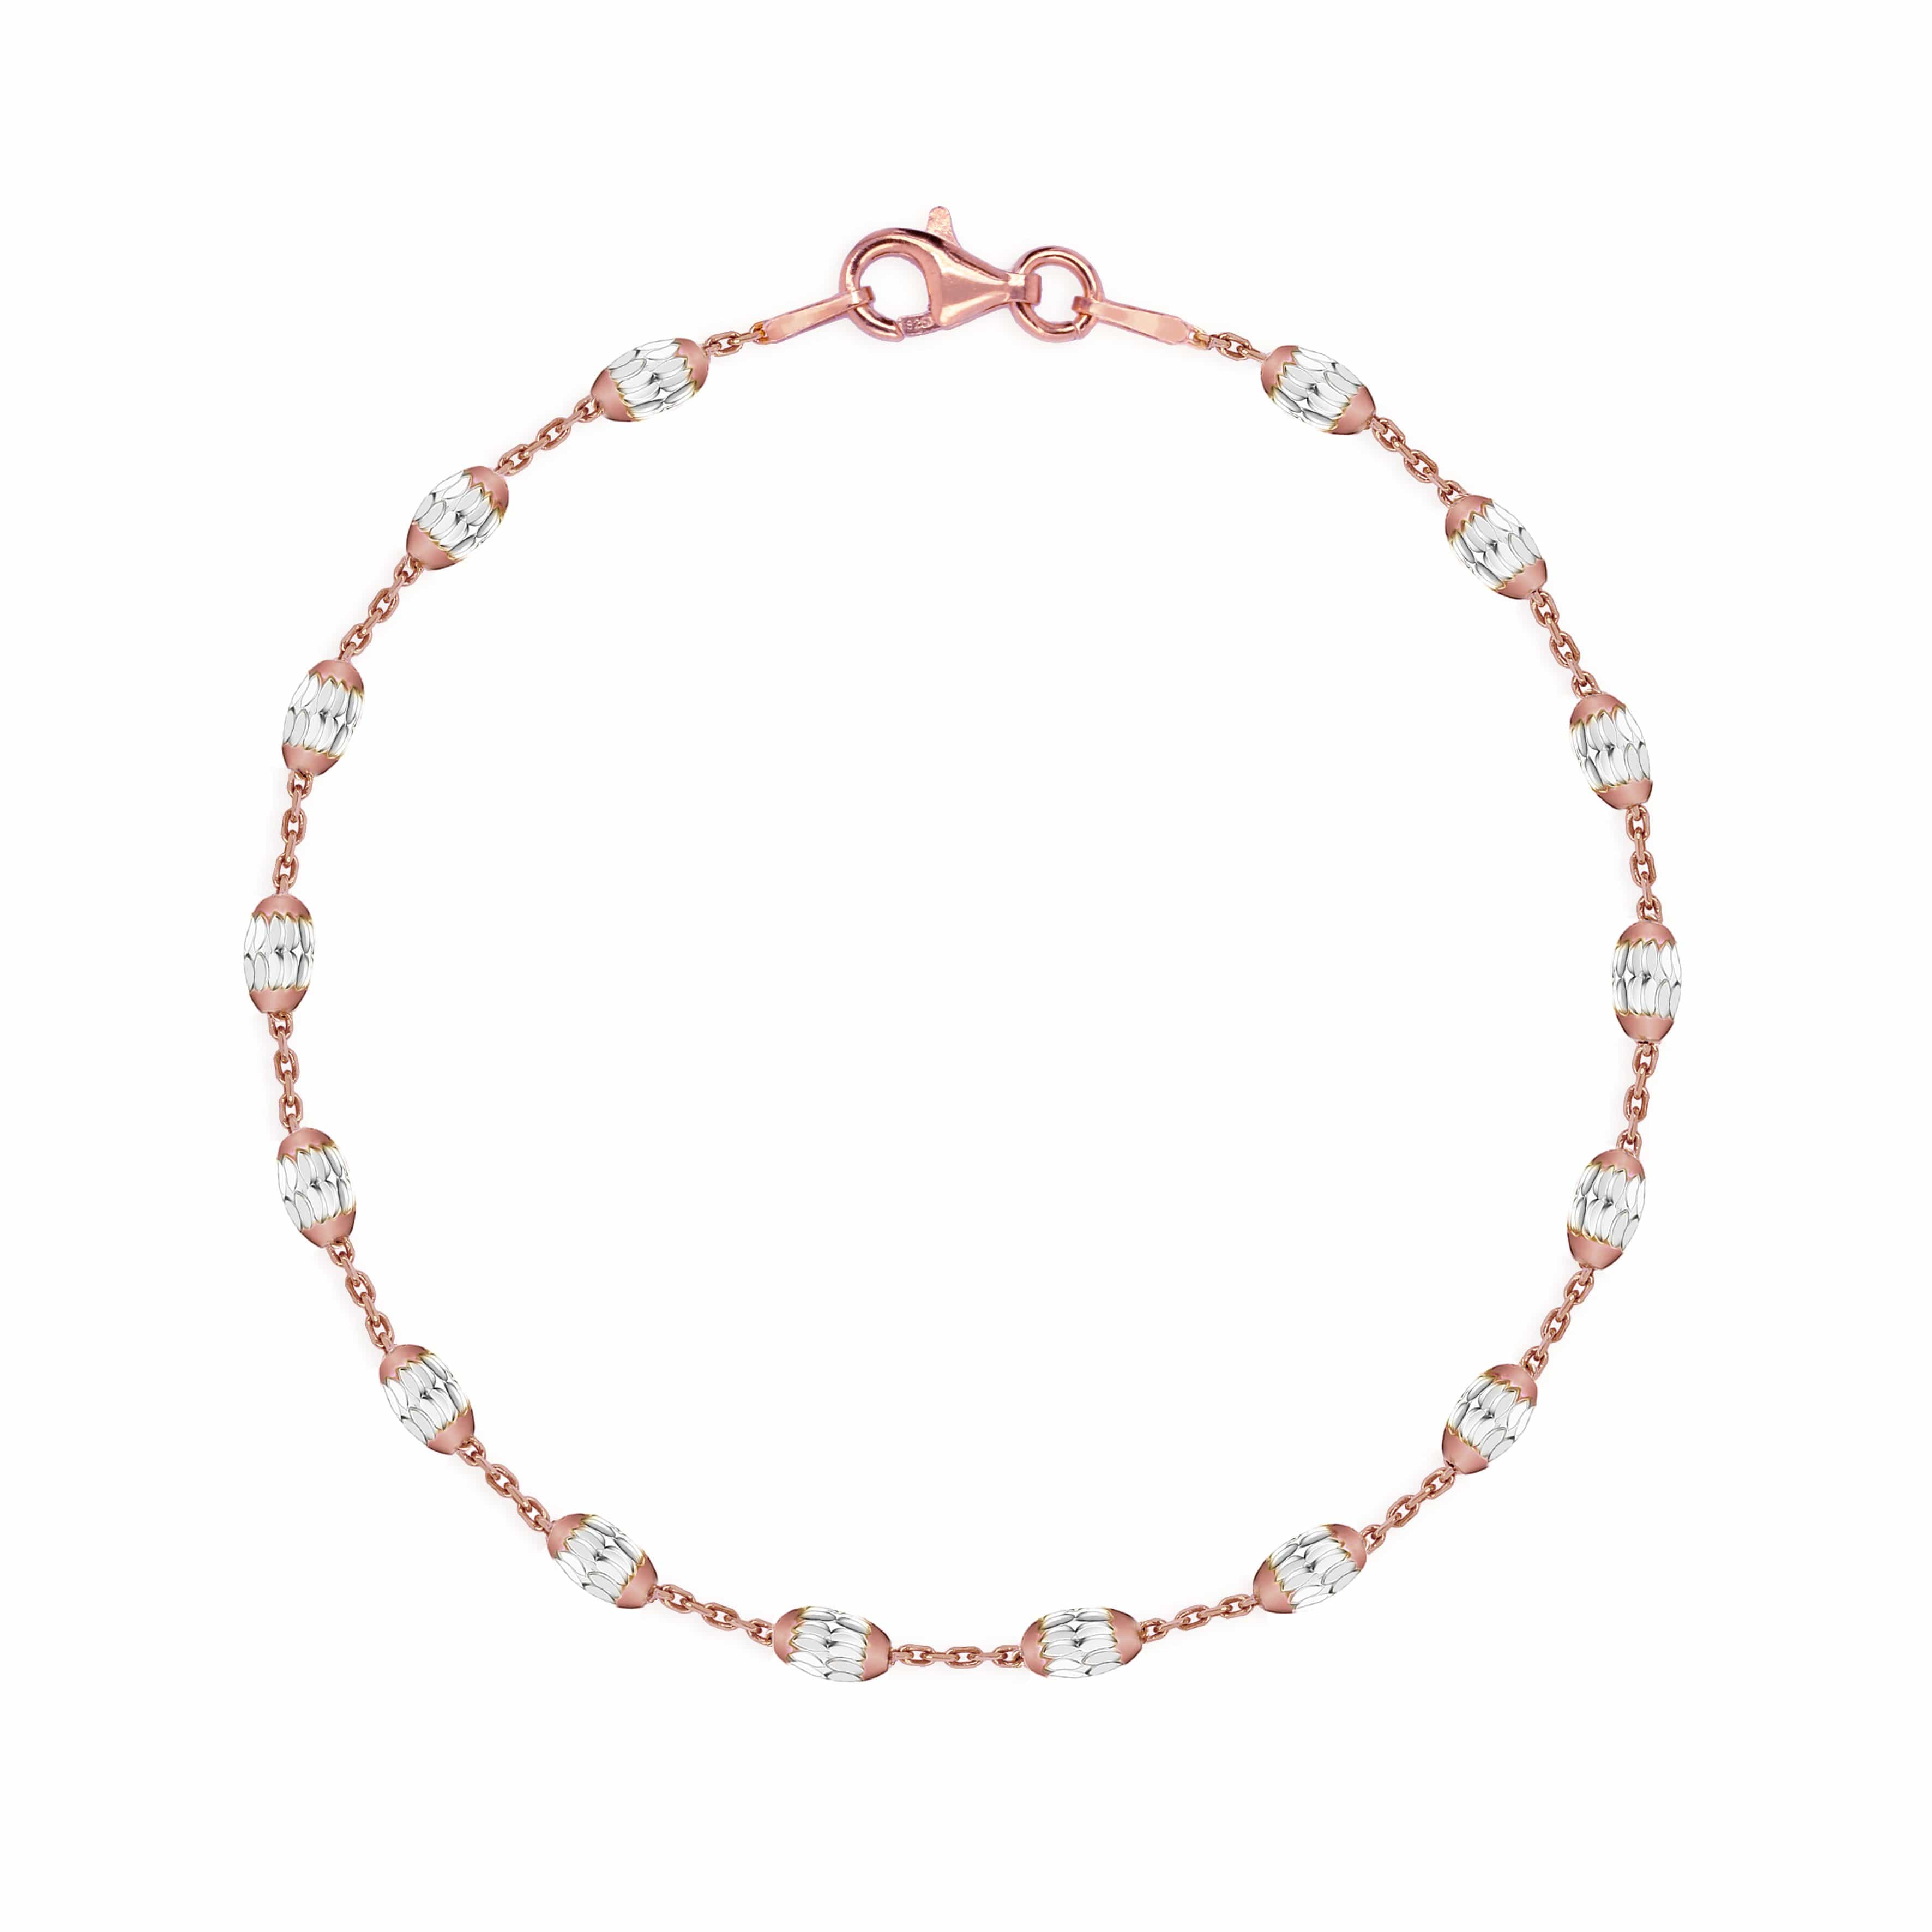 Lynora Jewellery Bracelet 7.5" / Mixed Metals Geobeads Bracelet Rose Gold Plate and Silver Mix